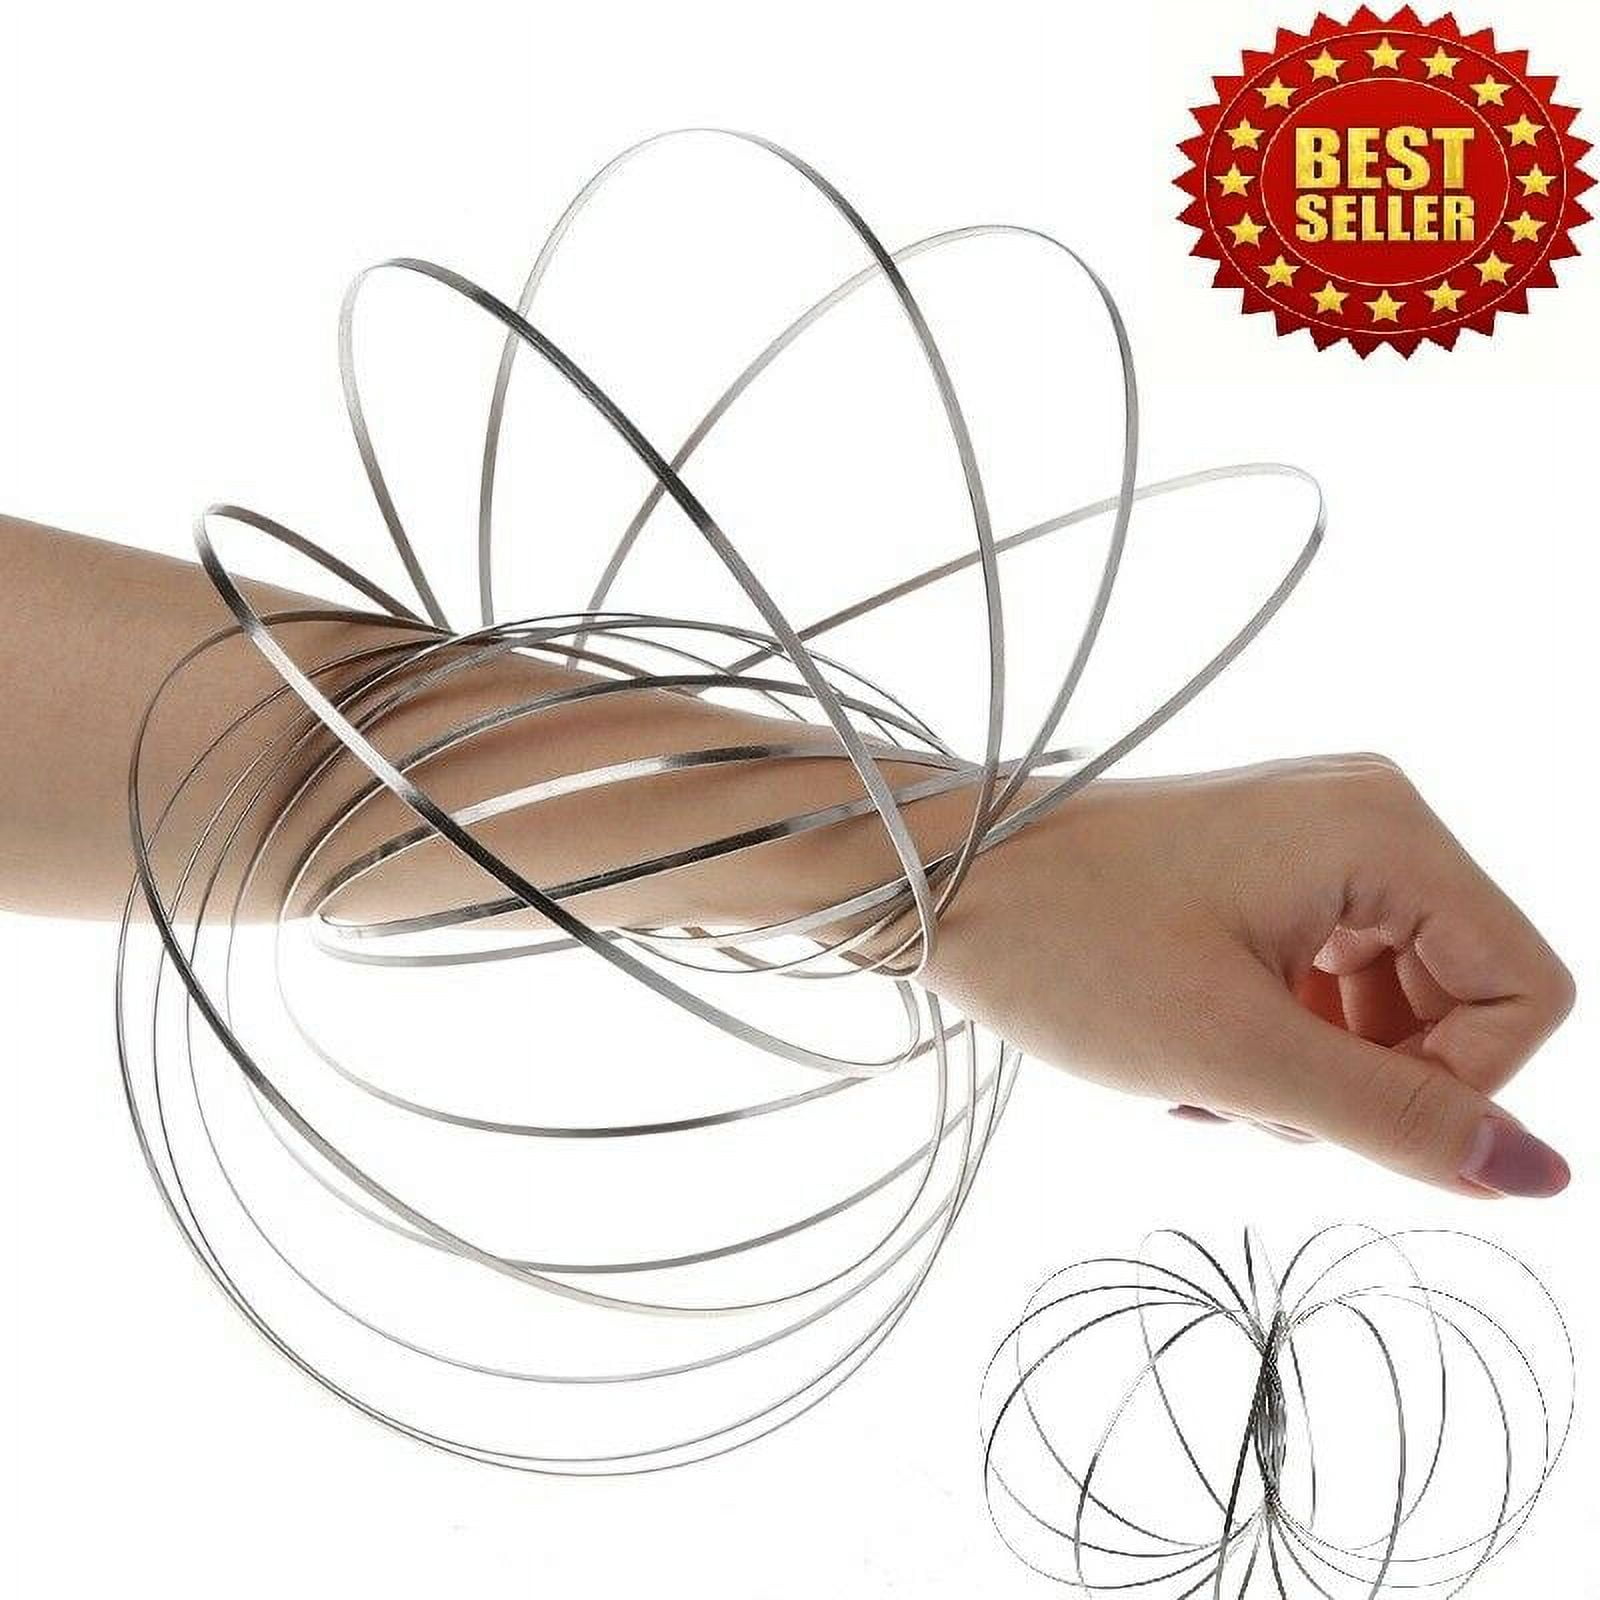 Magic Flow Rings Toys Funny Kinetic Spring Infinity Arm Slinky